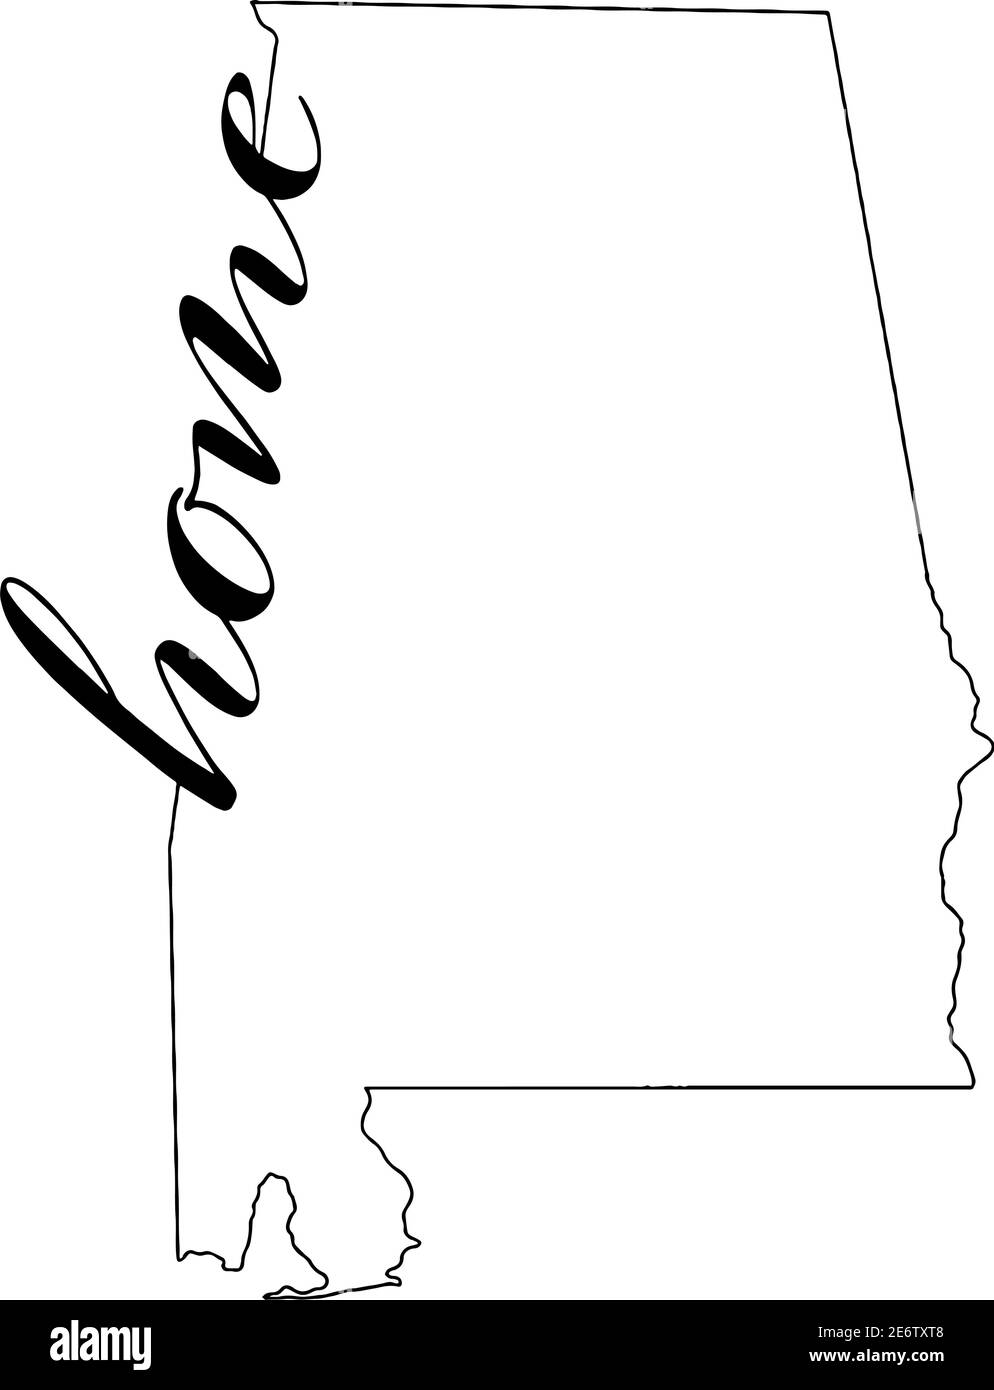 Alabama state map outline with the word home written in the map outline Stock Vector